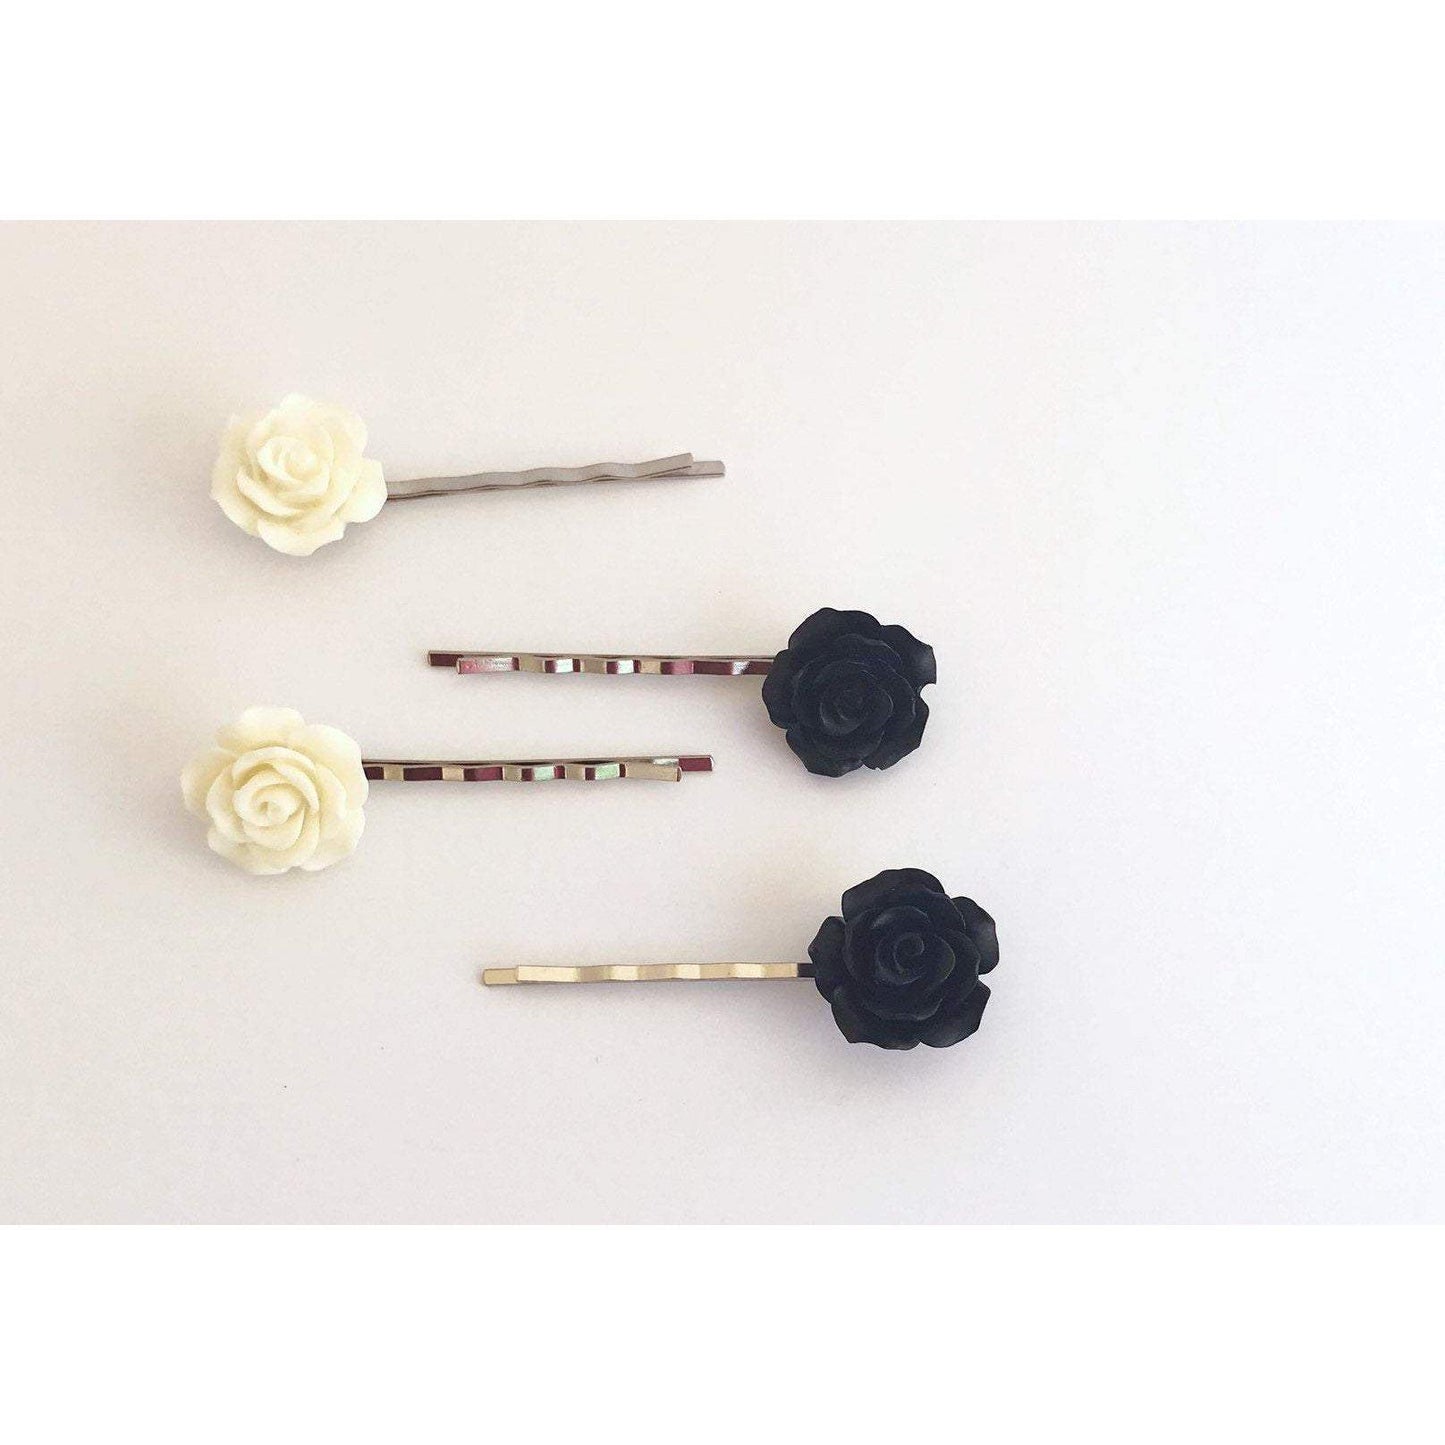 Chic Black & White Floral Bobby Pins: Stylish Hair Accessories